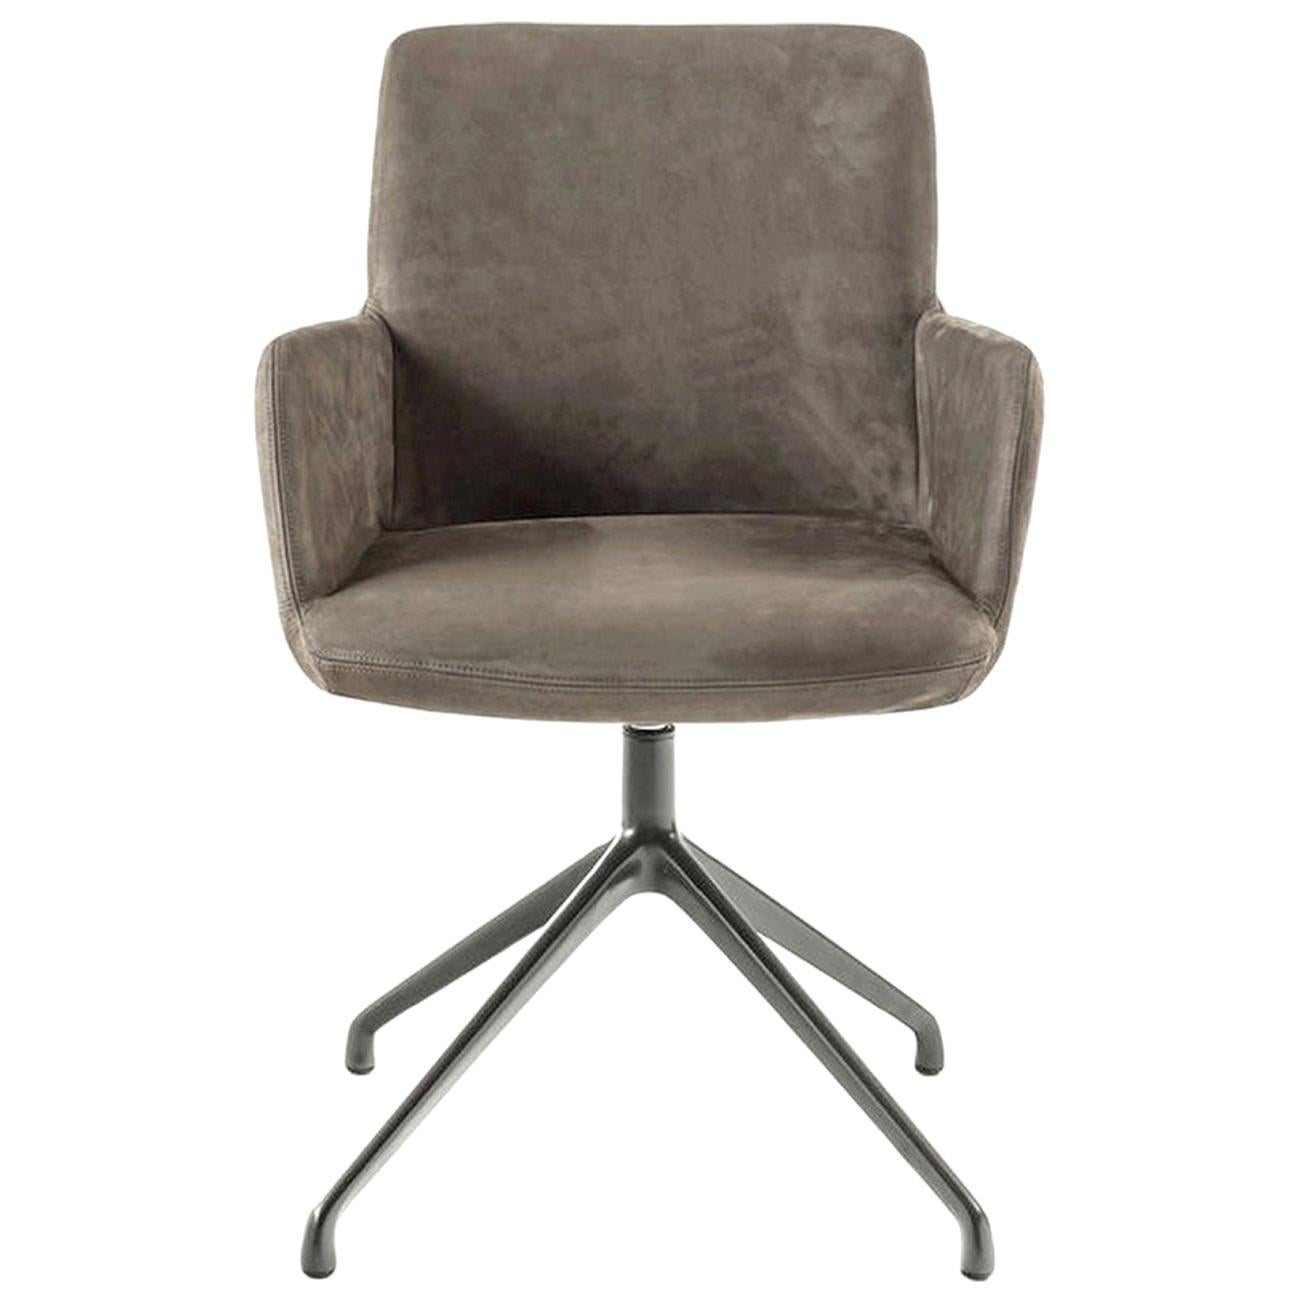 In Stock in Los Angeles, Grey Nabuk Armchair by Claudio Bellini, Made in Italy